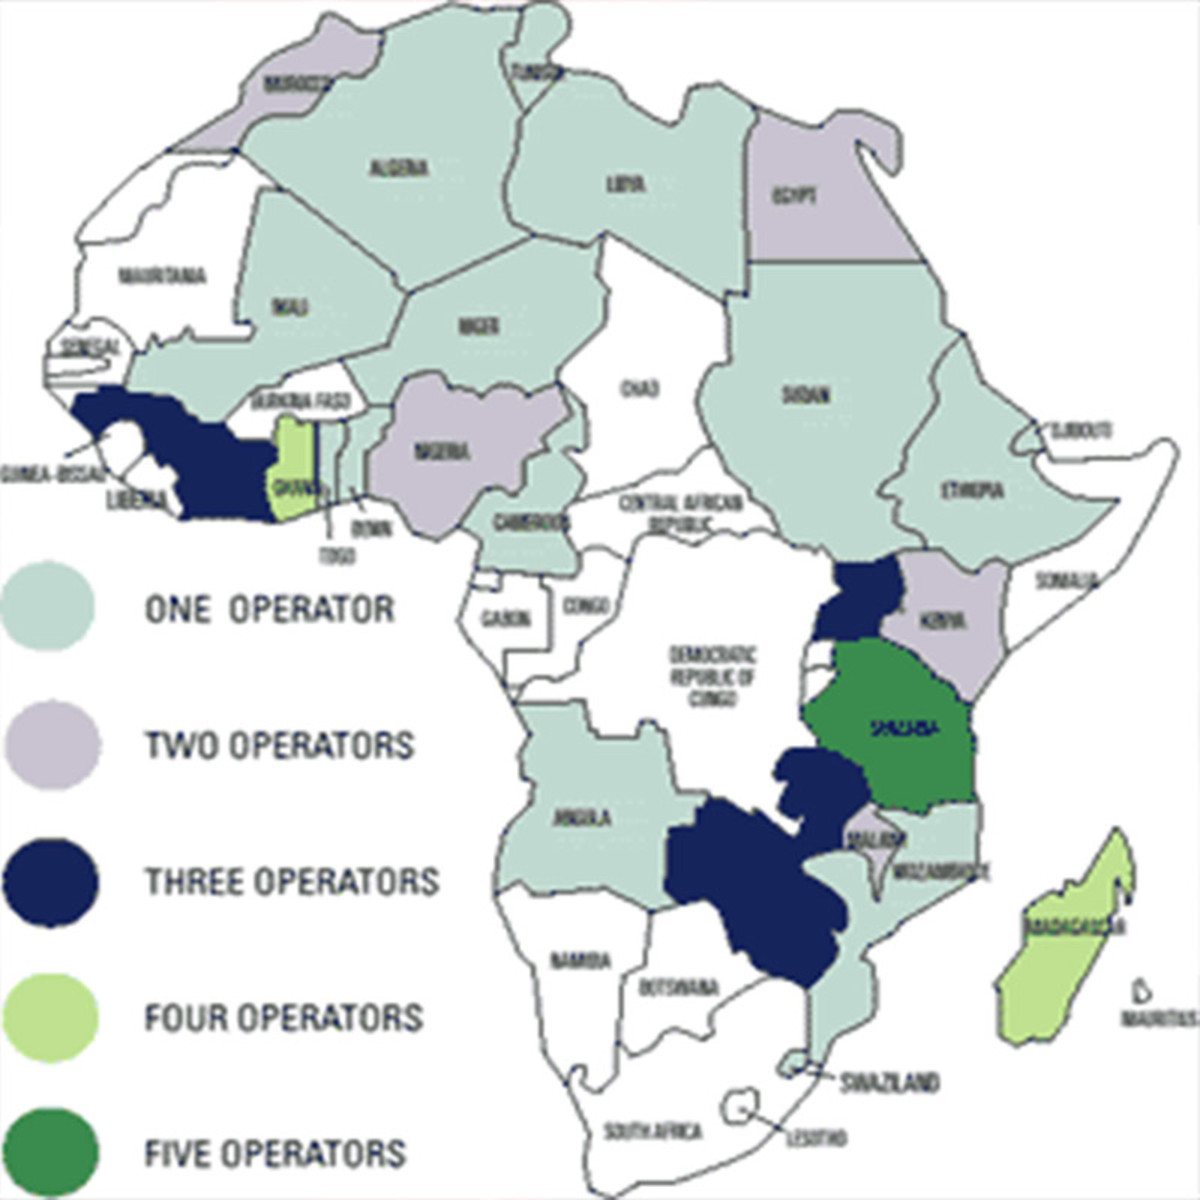 With these resources, Africa needs to combine telecommunications and information to create partnerships among African and non-African firms, government, and non-governmental organizations to realize succeess